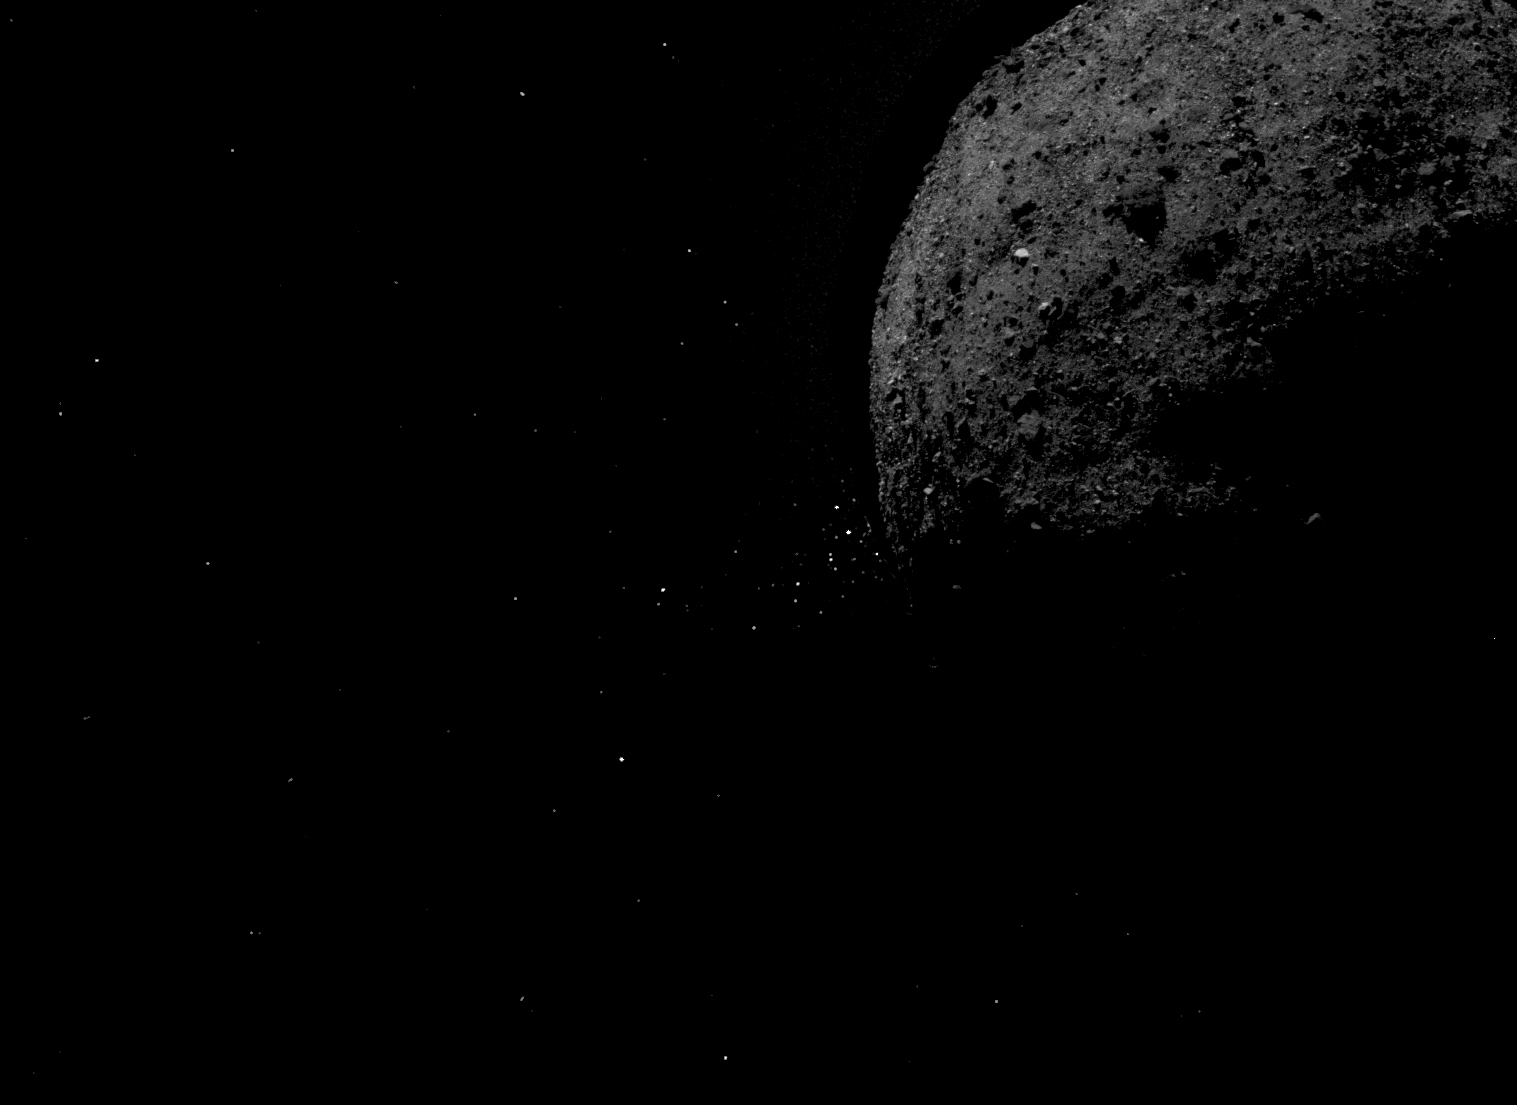 Asteroid Bennu ejecting rock particles